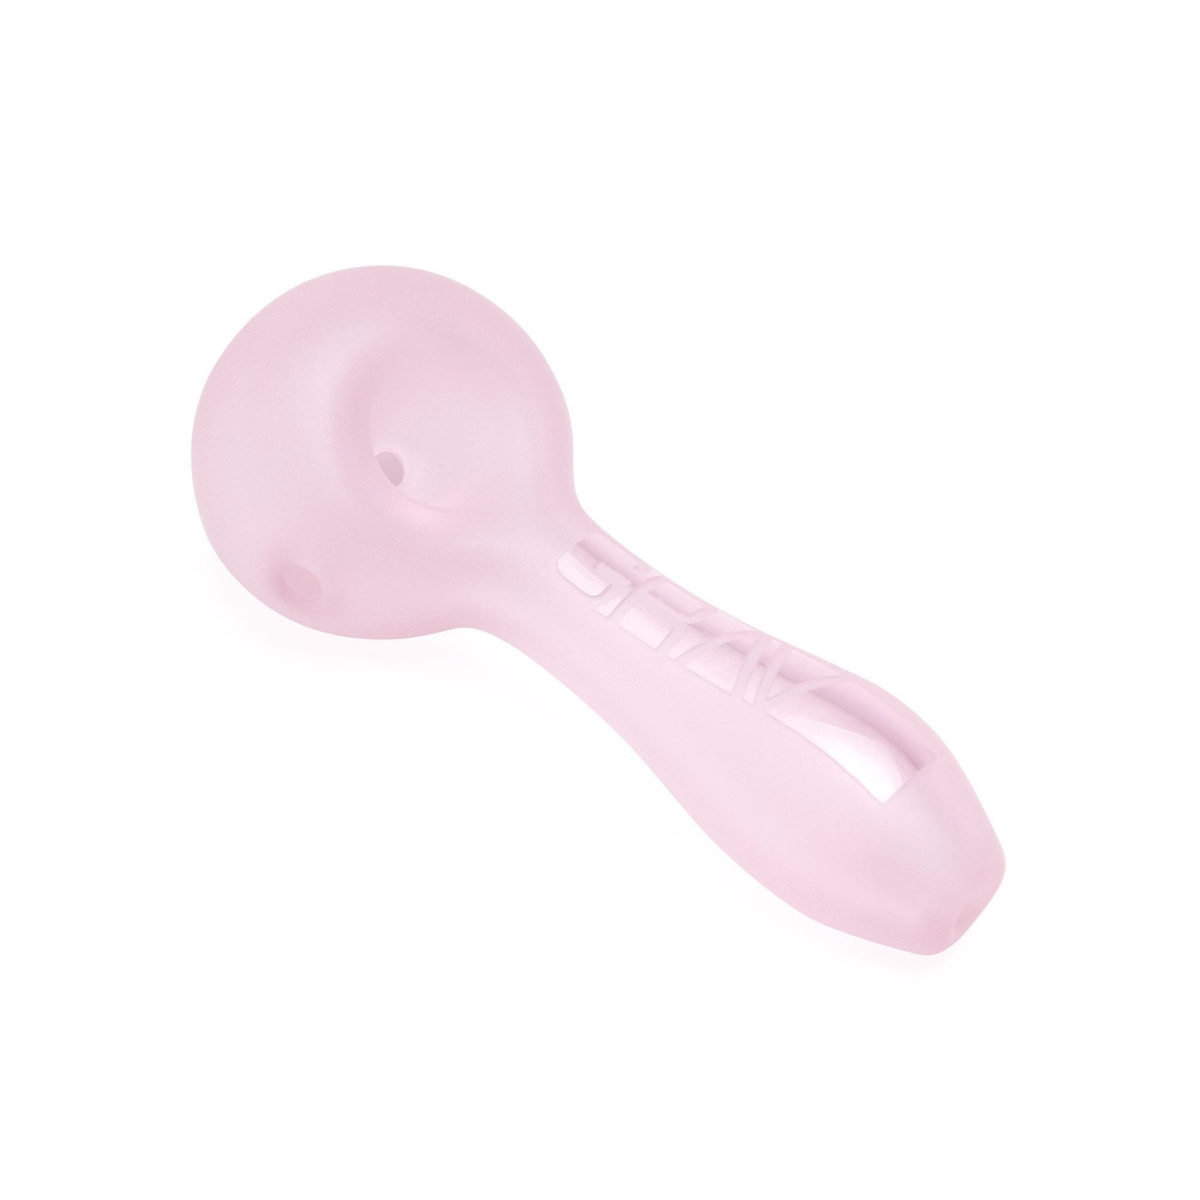 675866 4 In. Frit Bowl Spoon Sandblasted Frosted Pipe - Pink